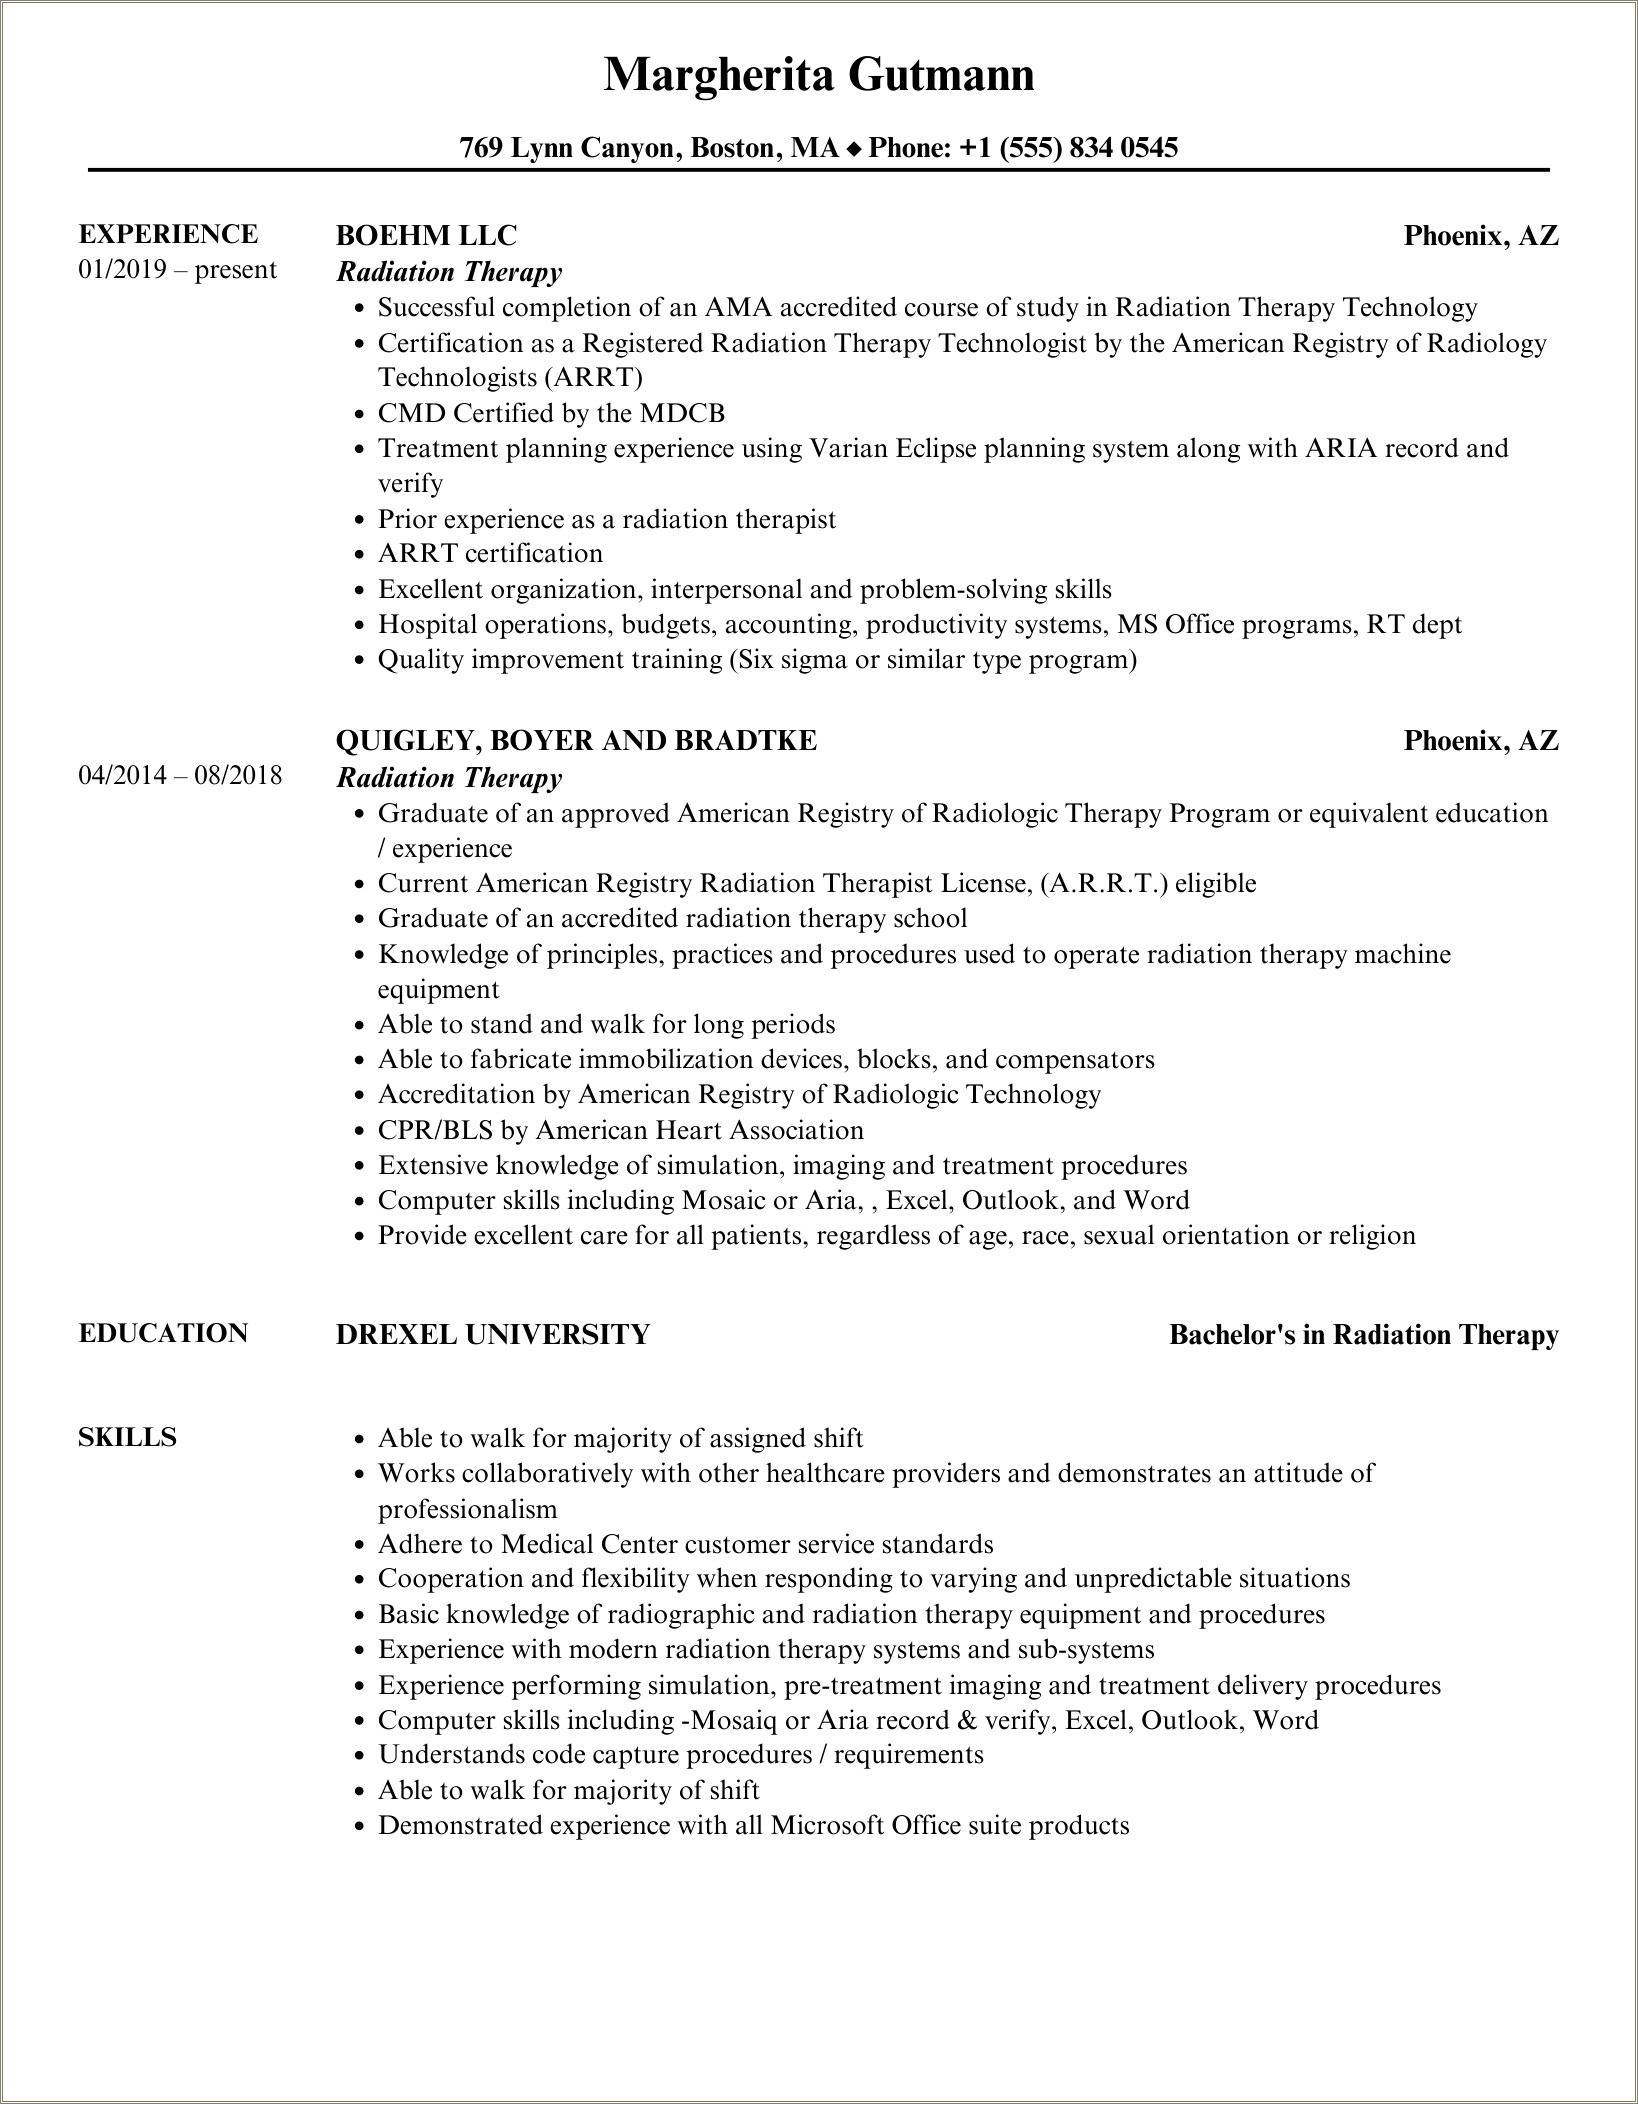 Resume Examples For Radiation Therapist - Resume Example Gallery